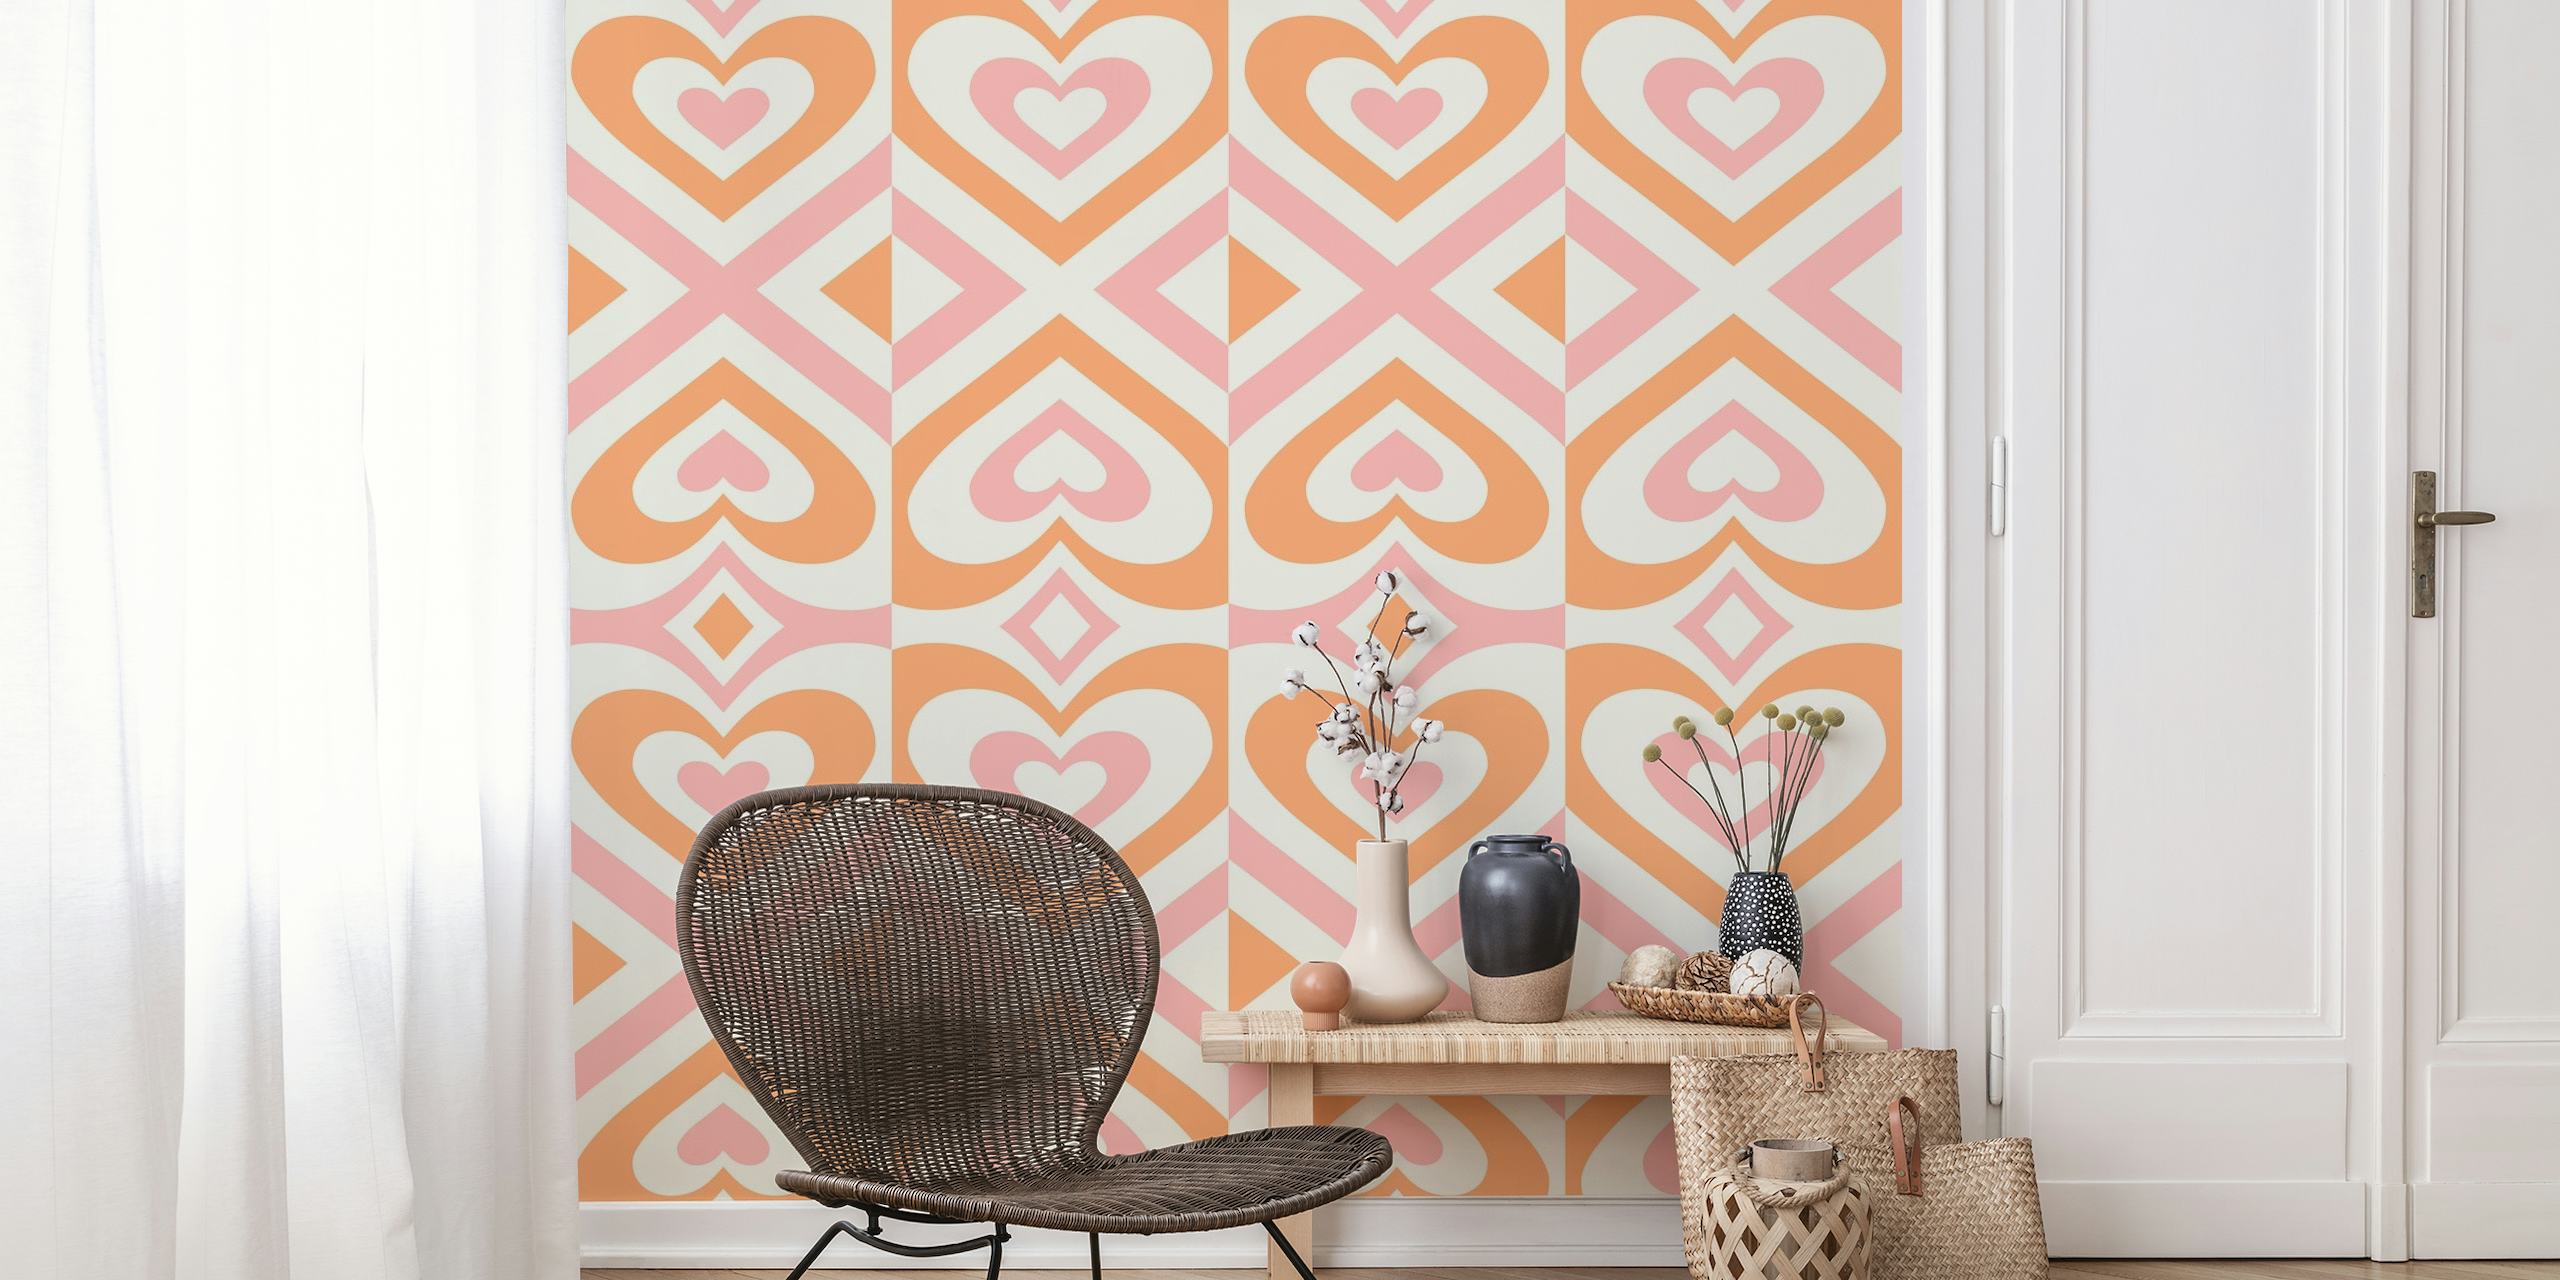 Hypnotic Hearts Patterns wall mural in warm colors with intertwined heart designs